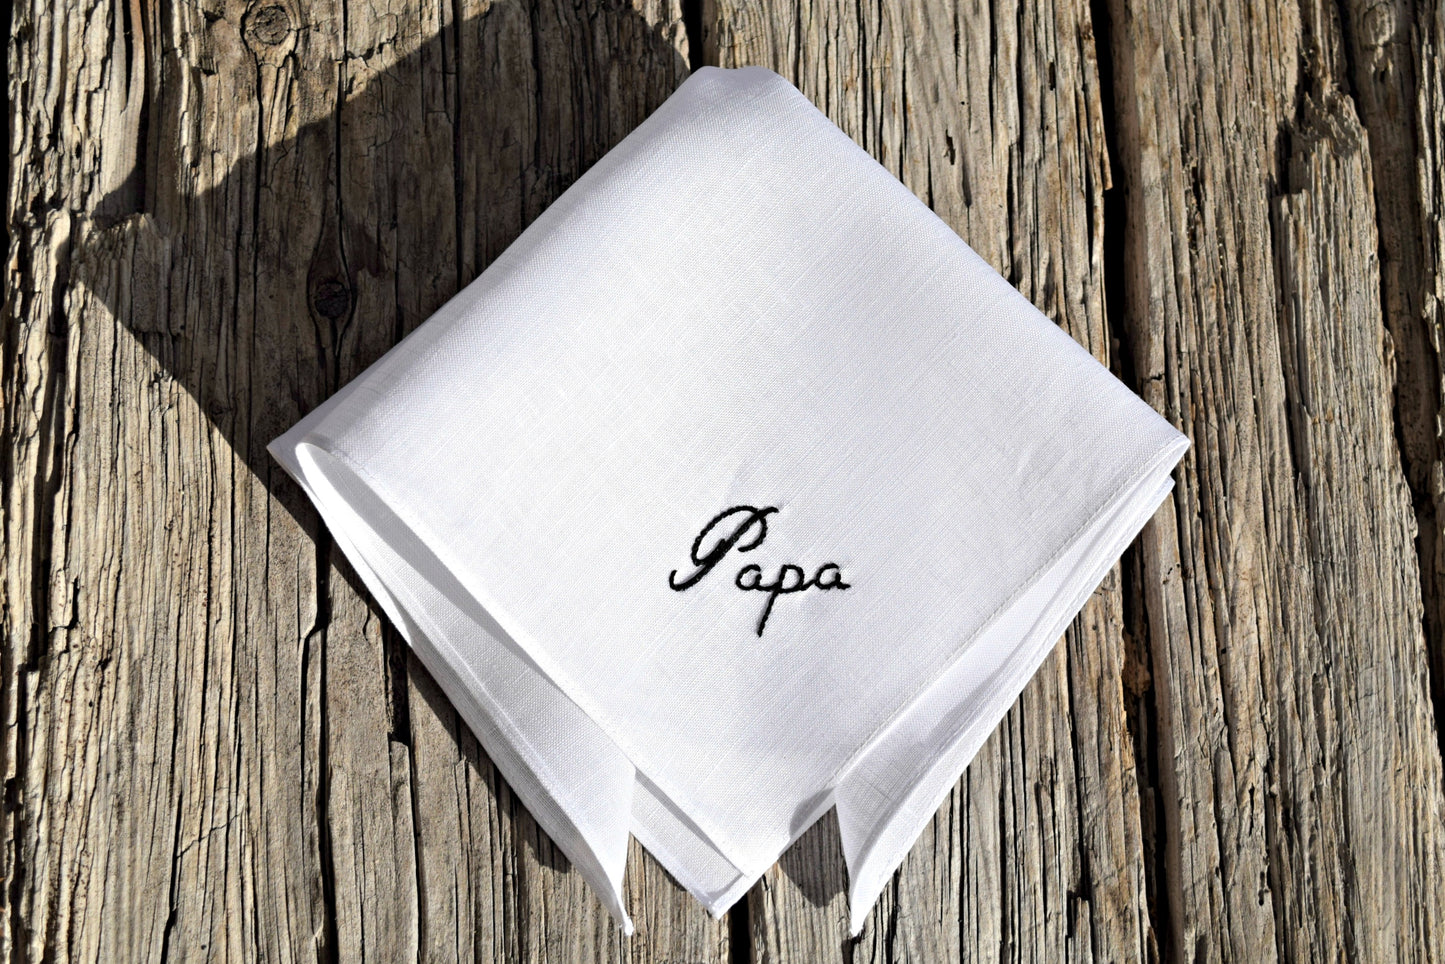 White linen hankie on wood ground, monogrammed with 'Papa'